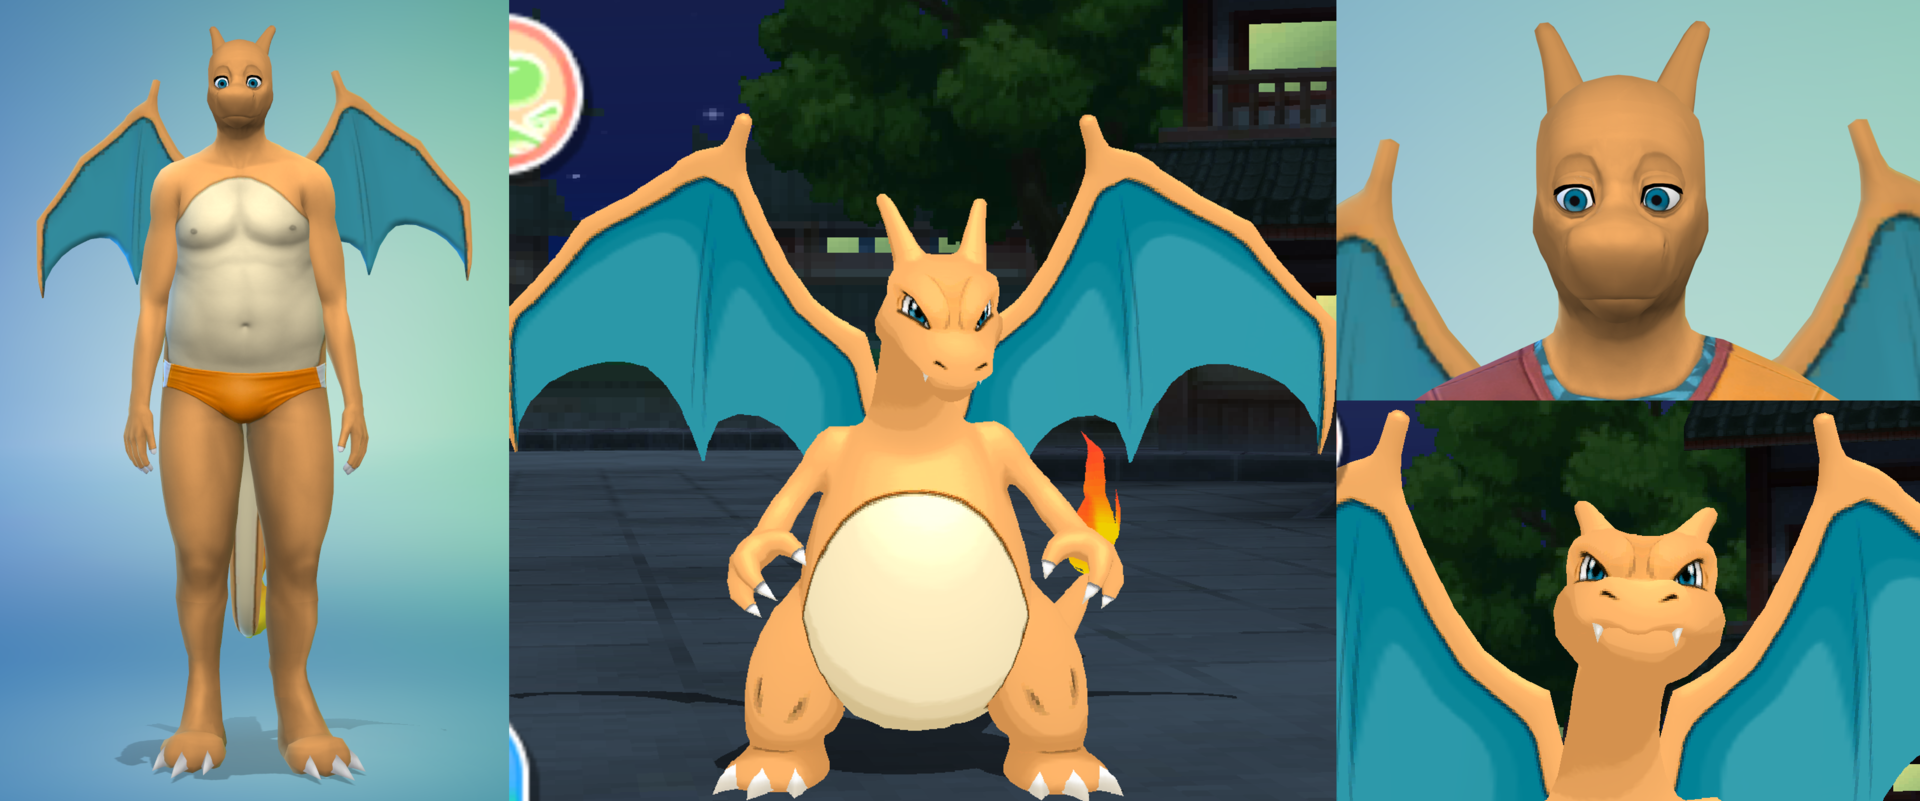 CharizardNNComp.thumb.png.82b96964a47c4beff7a9834de6952acd.png